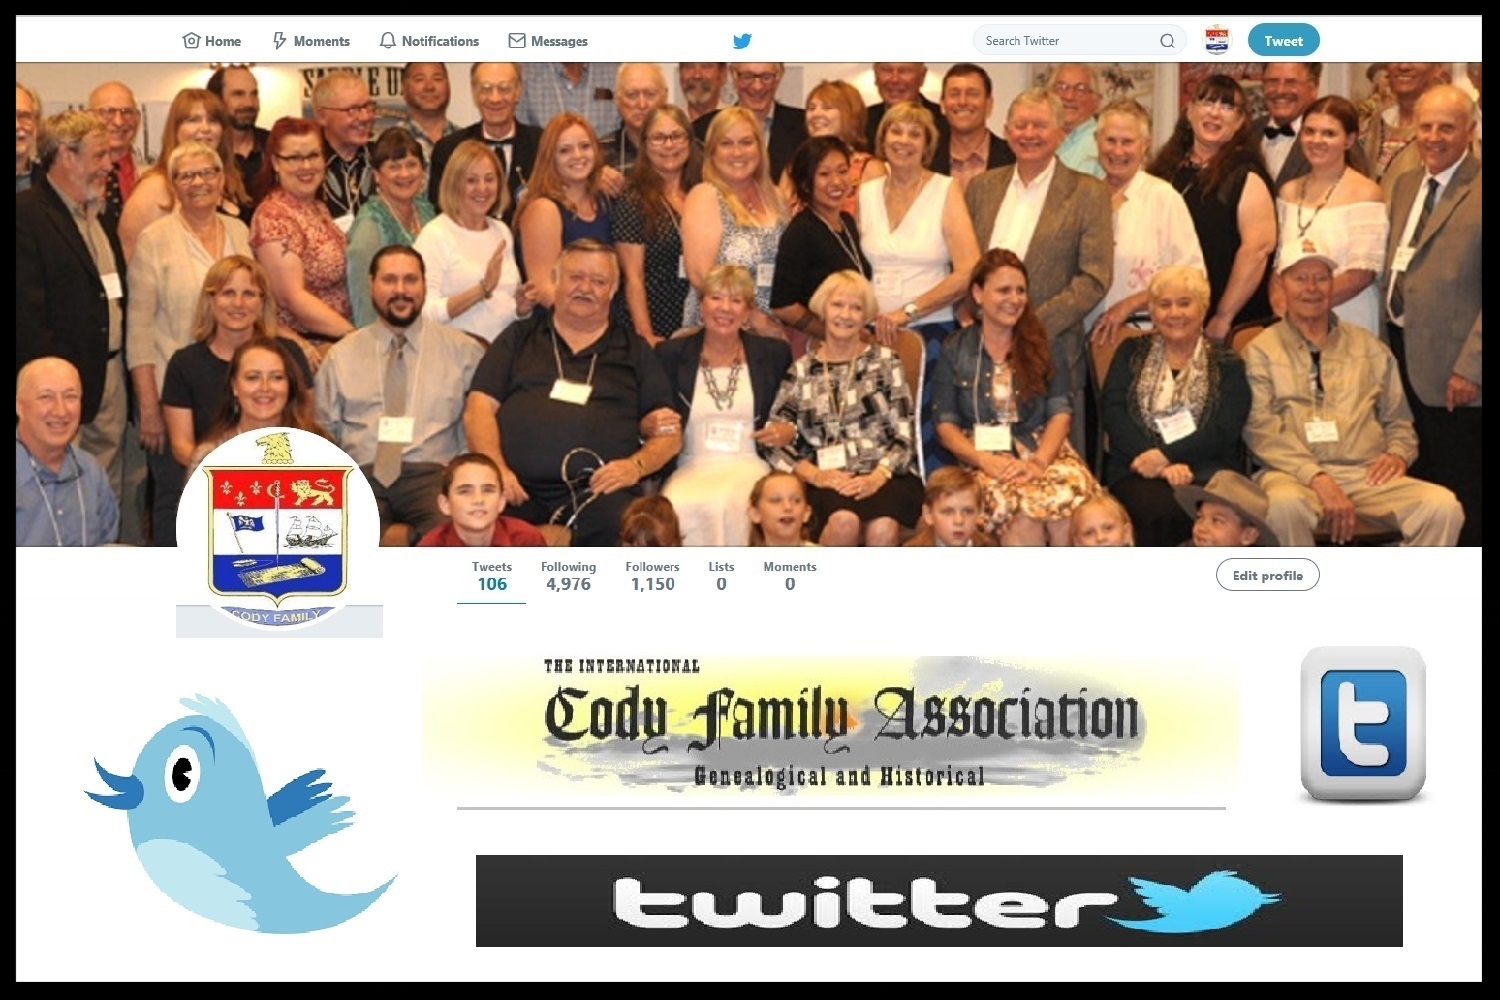 International Cody Family Association's Twitter Page